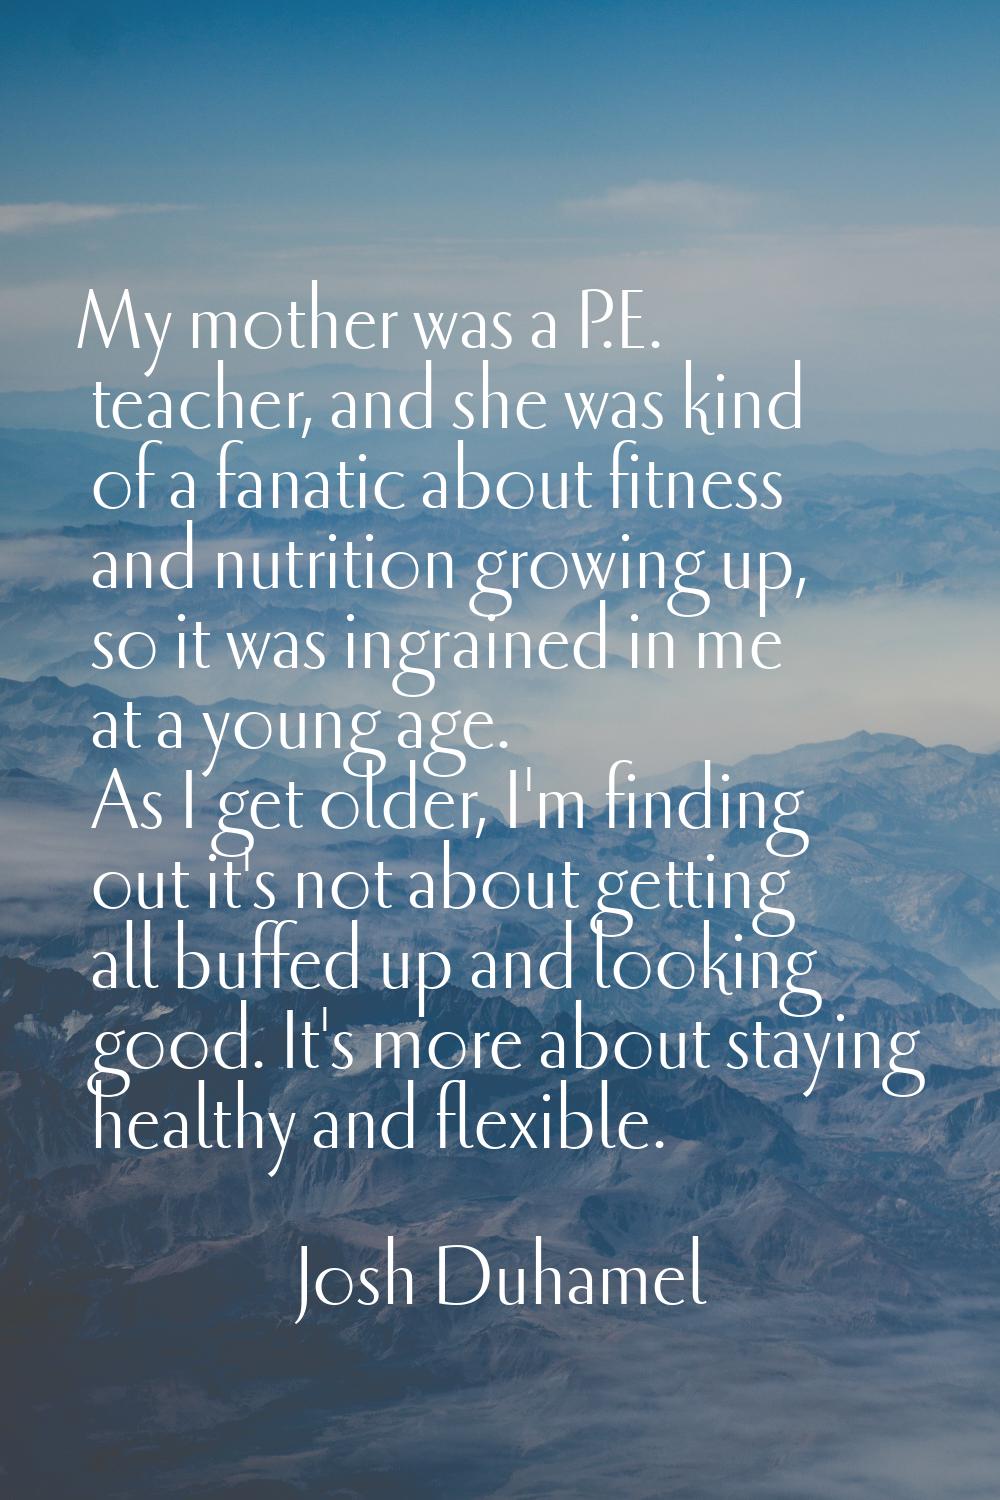 My mother was a P.E. teacher, and she was kind of a fanatic about fitness and nutrition growing up,